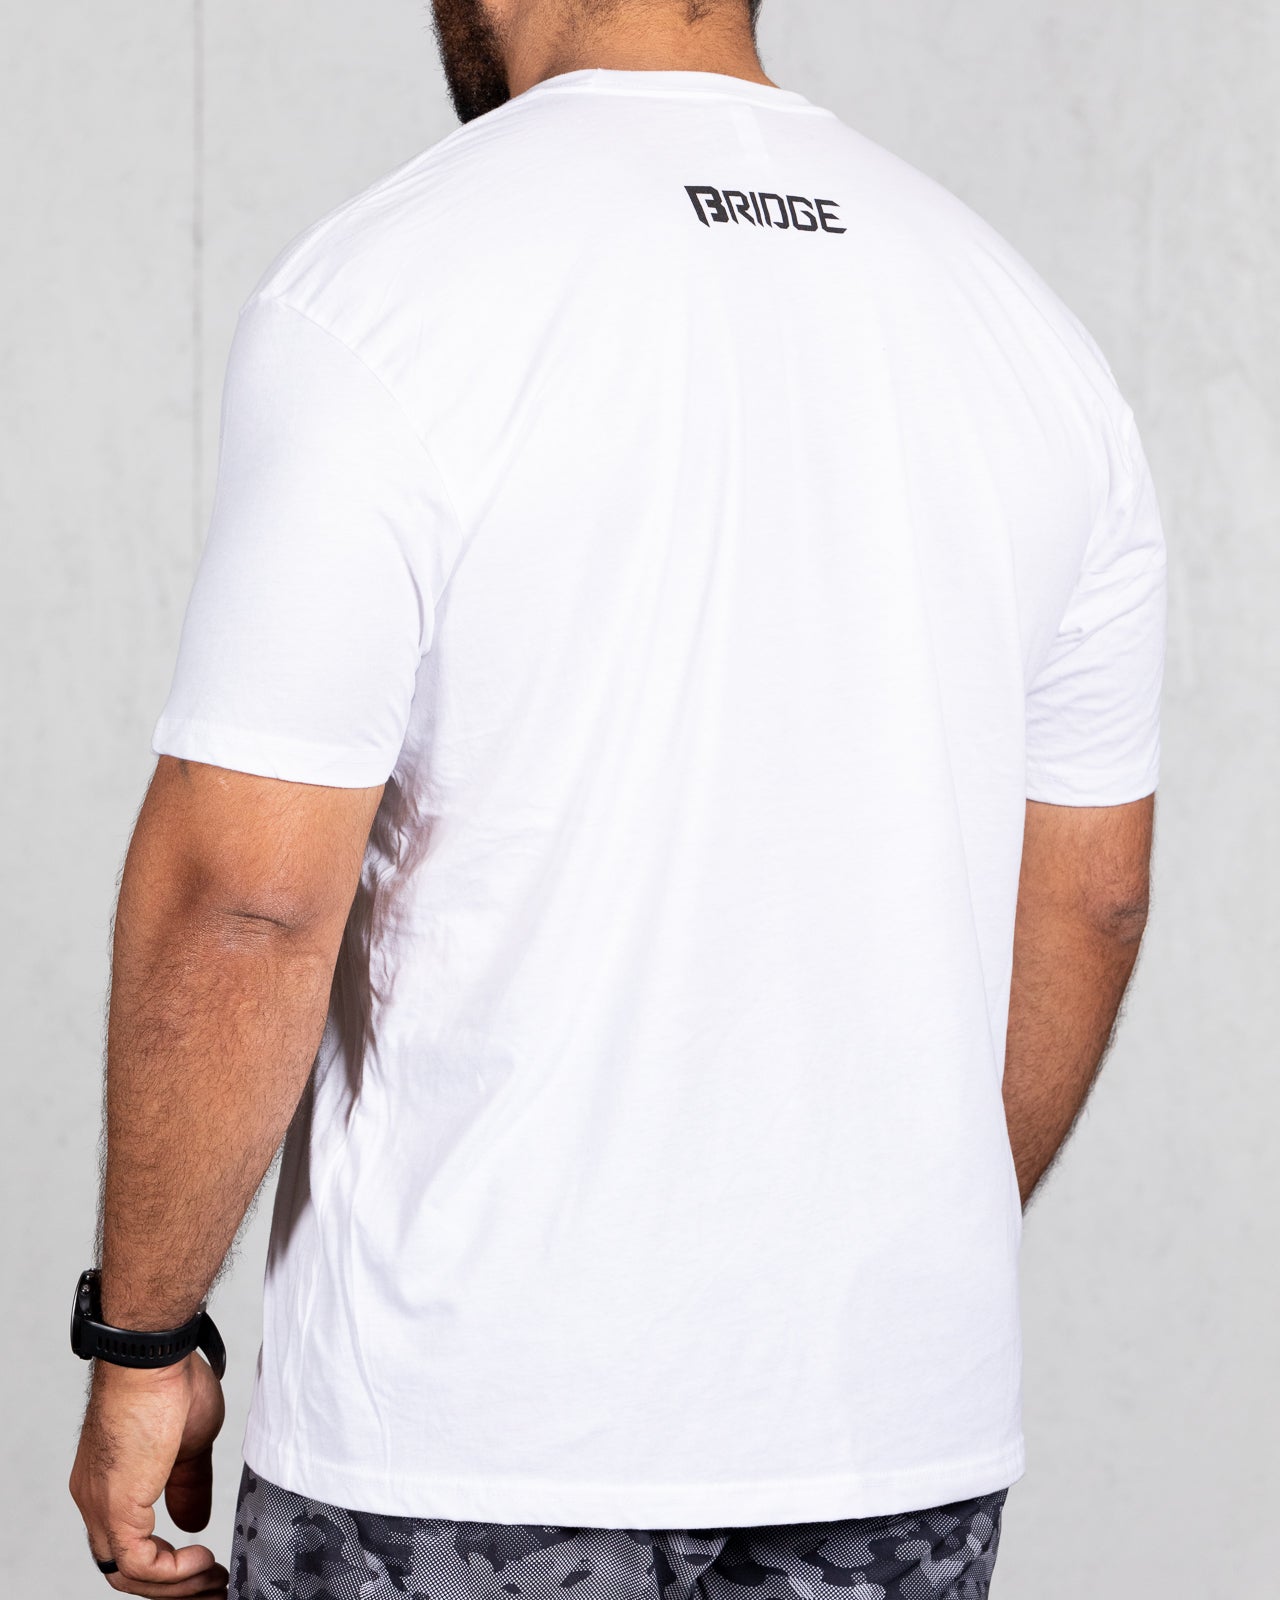 man wearing white big beefy brand shirt from back 